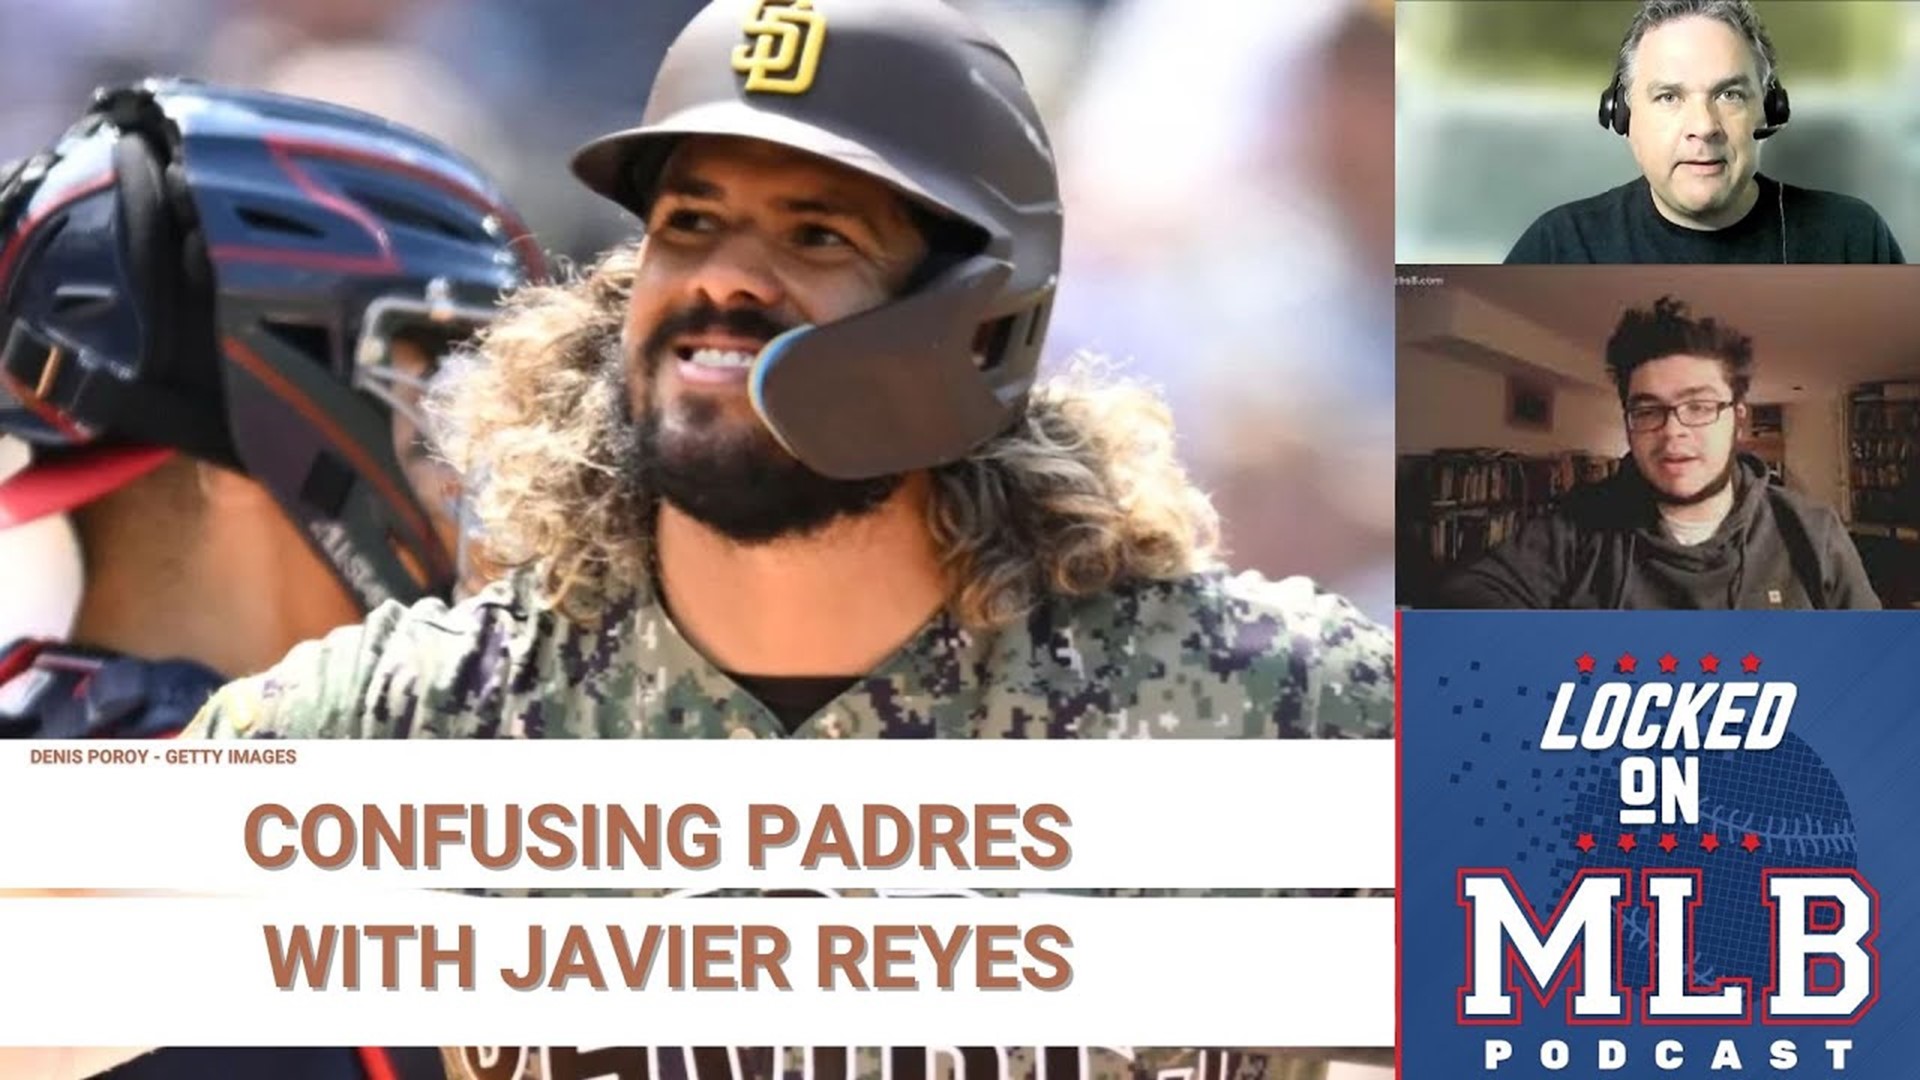 Making Sense of the Confusing Padres with Javier Reyes - Locked on MLB